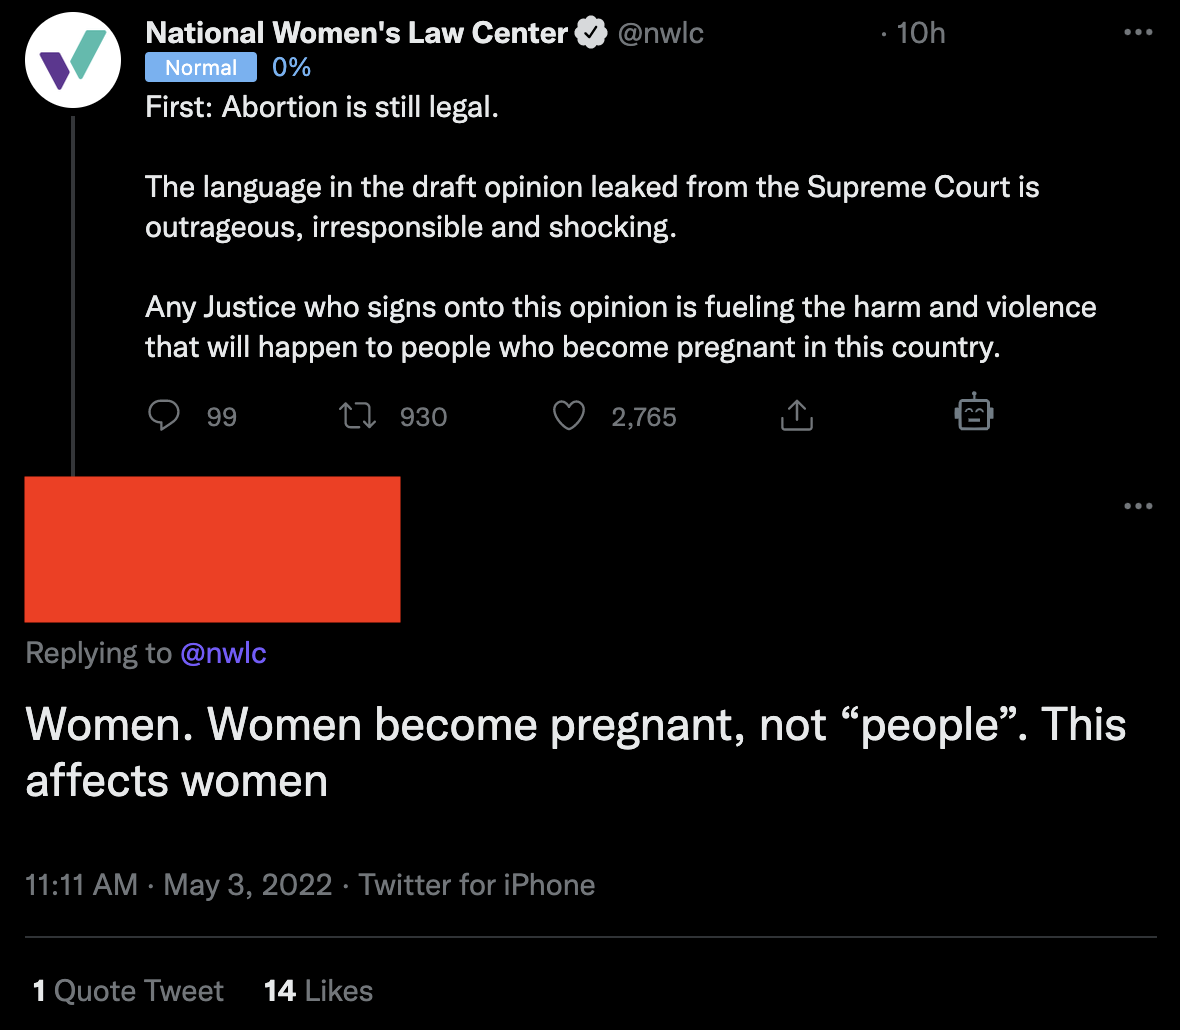 A screenshot of a twitter user replying to NWLC's thread on abortion with 'Women. Women become pregnant, not “people”. This affects women'.